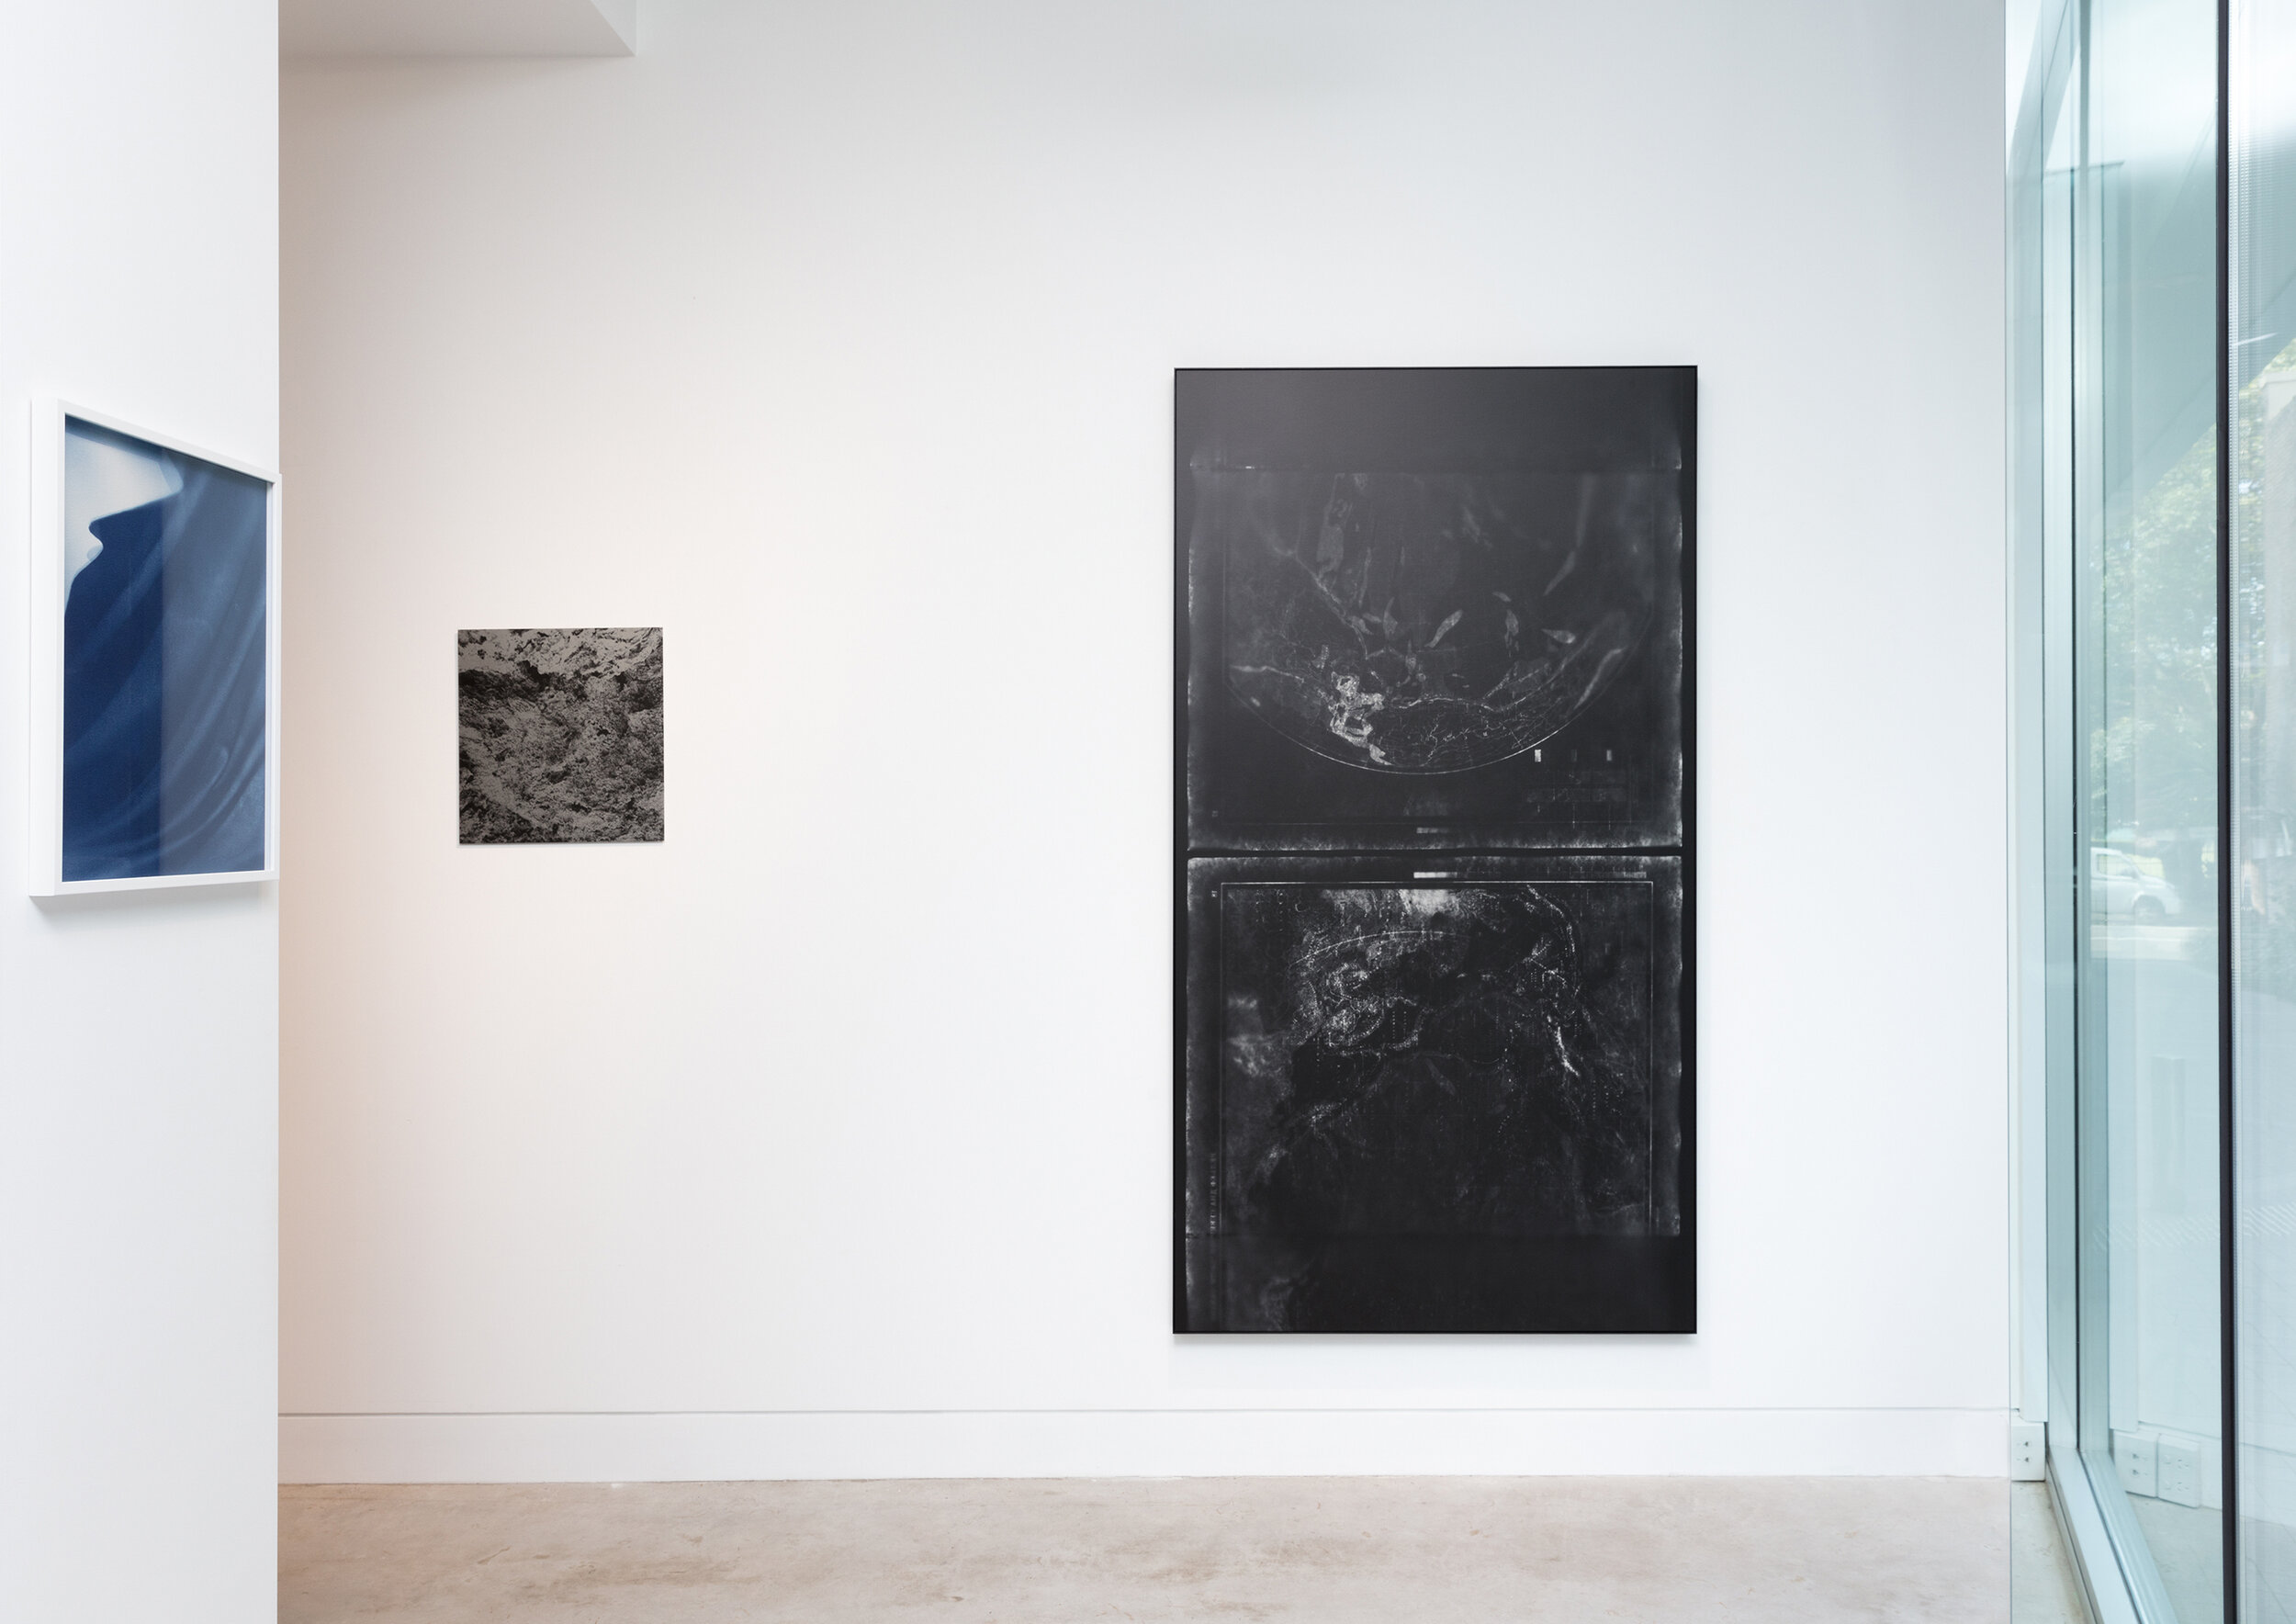    Measures of Refraction   2020  installation view 